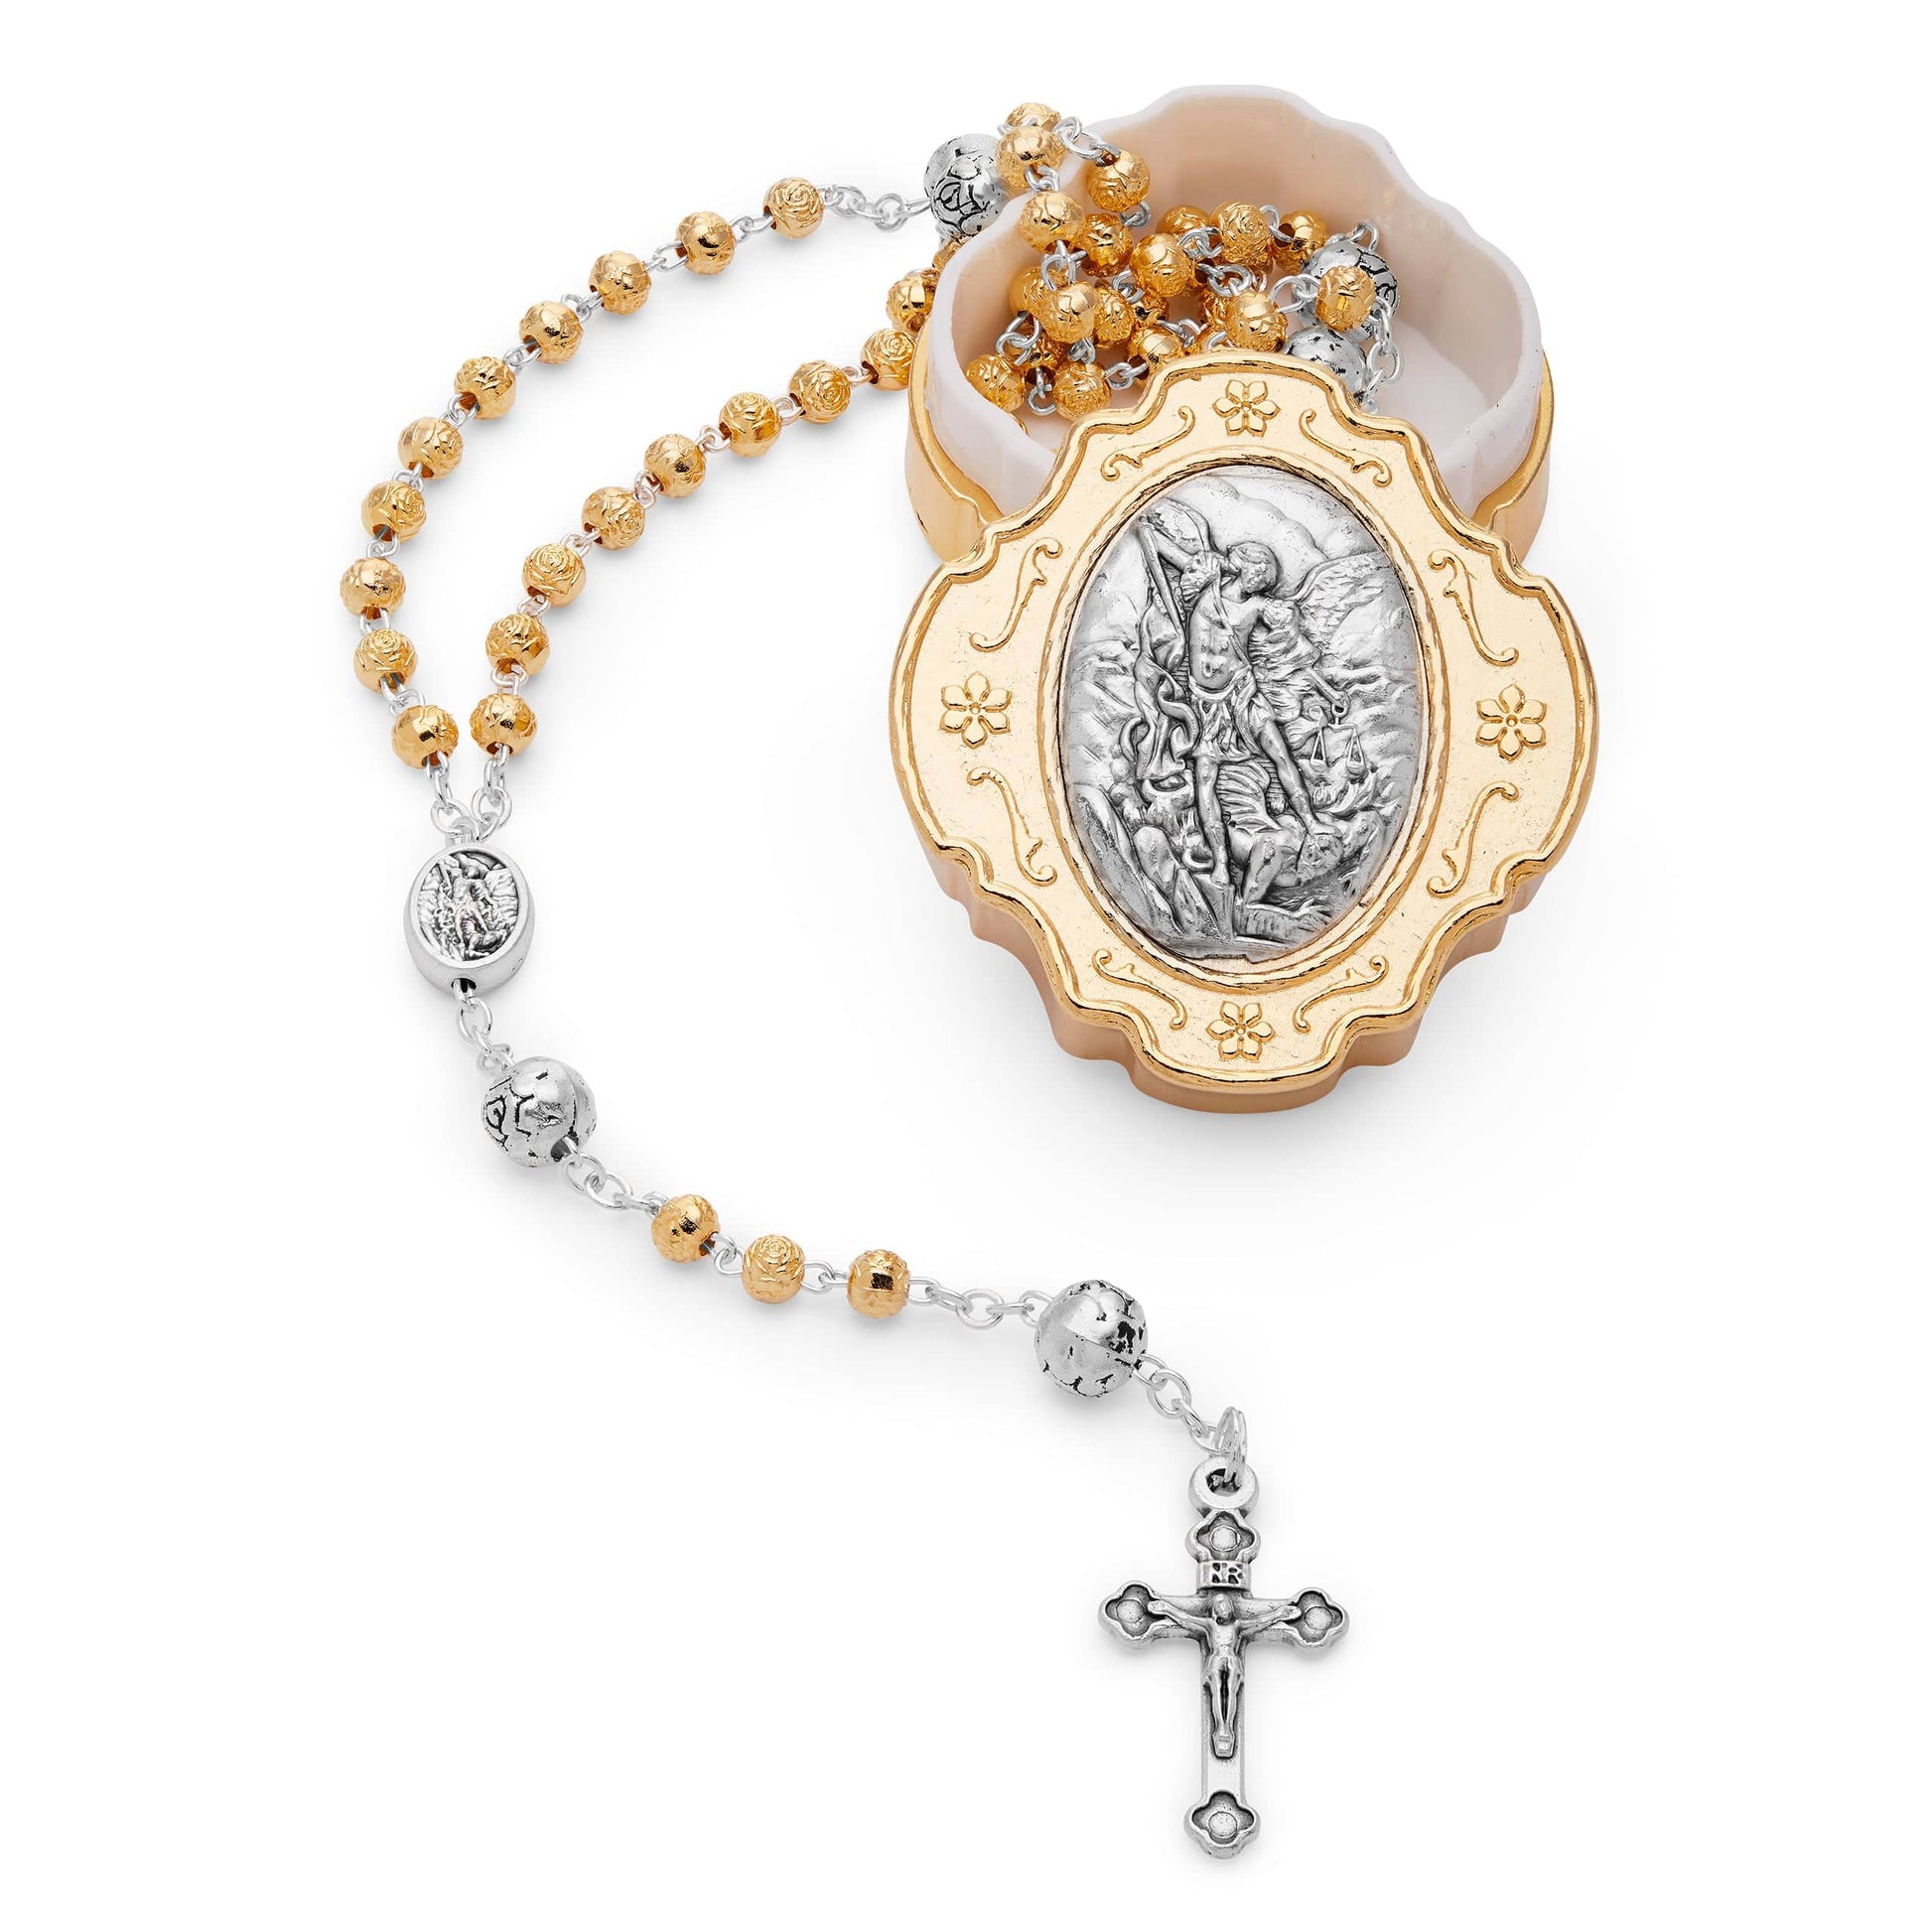 MONDO CATTOLICO Prayer Beads 32 cm (12.6 in) / 4 mm (0.15 in) Saint Michael Box and Rosary